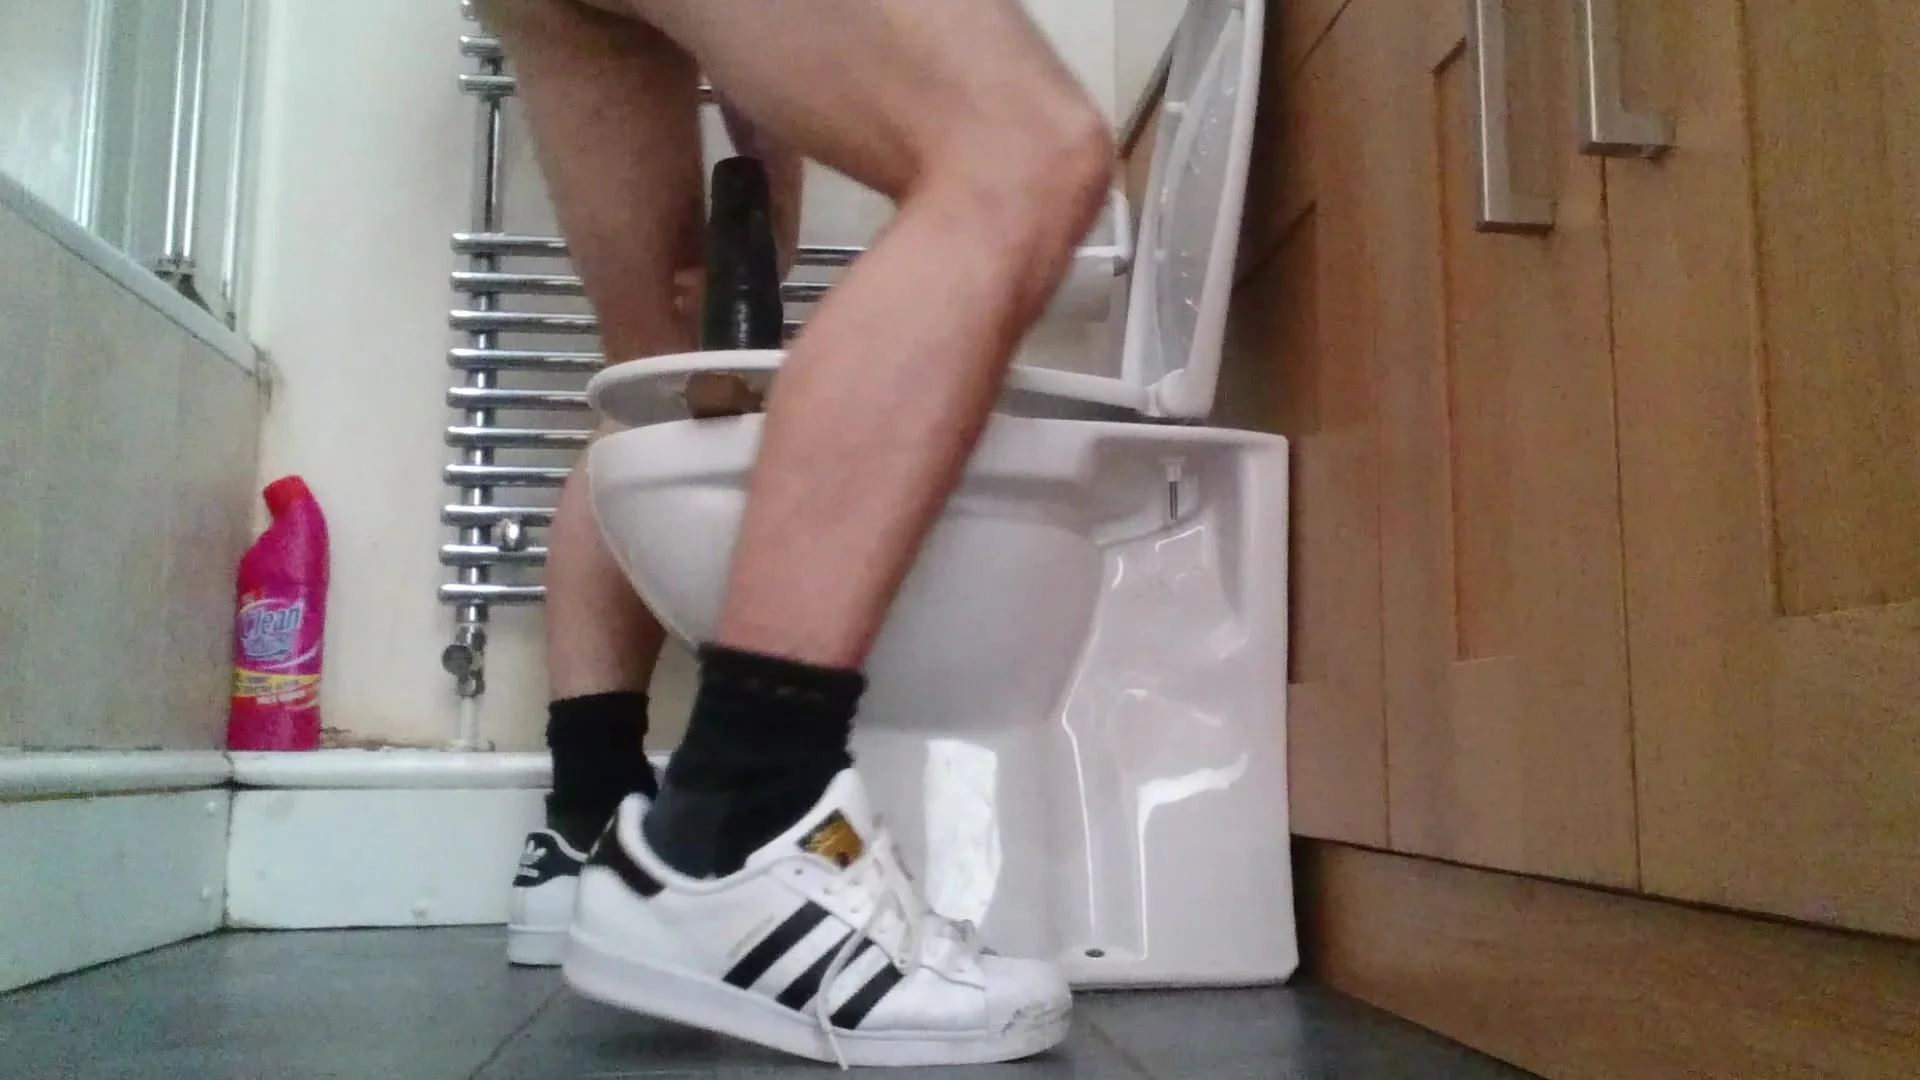 Toilet Seat Fuck And Wank Part Two Male Voyeur Porn At